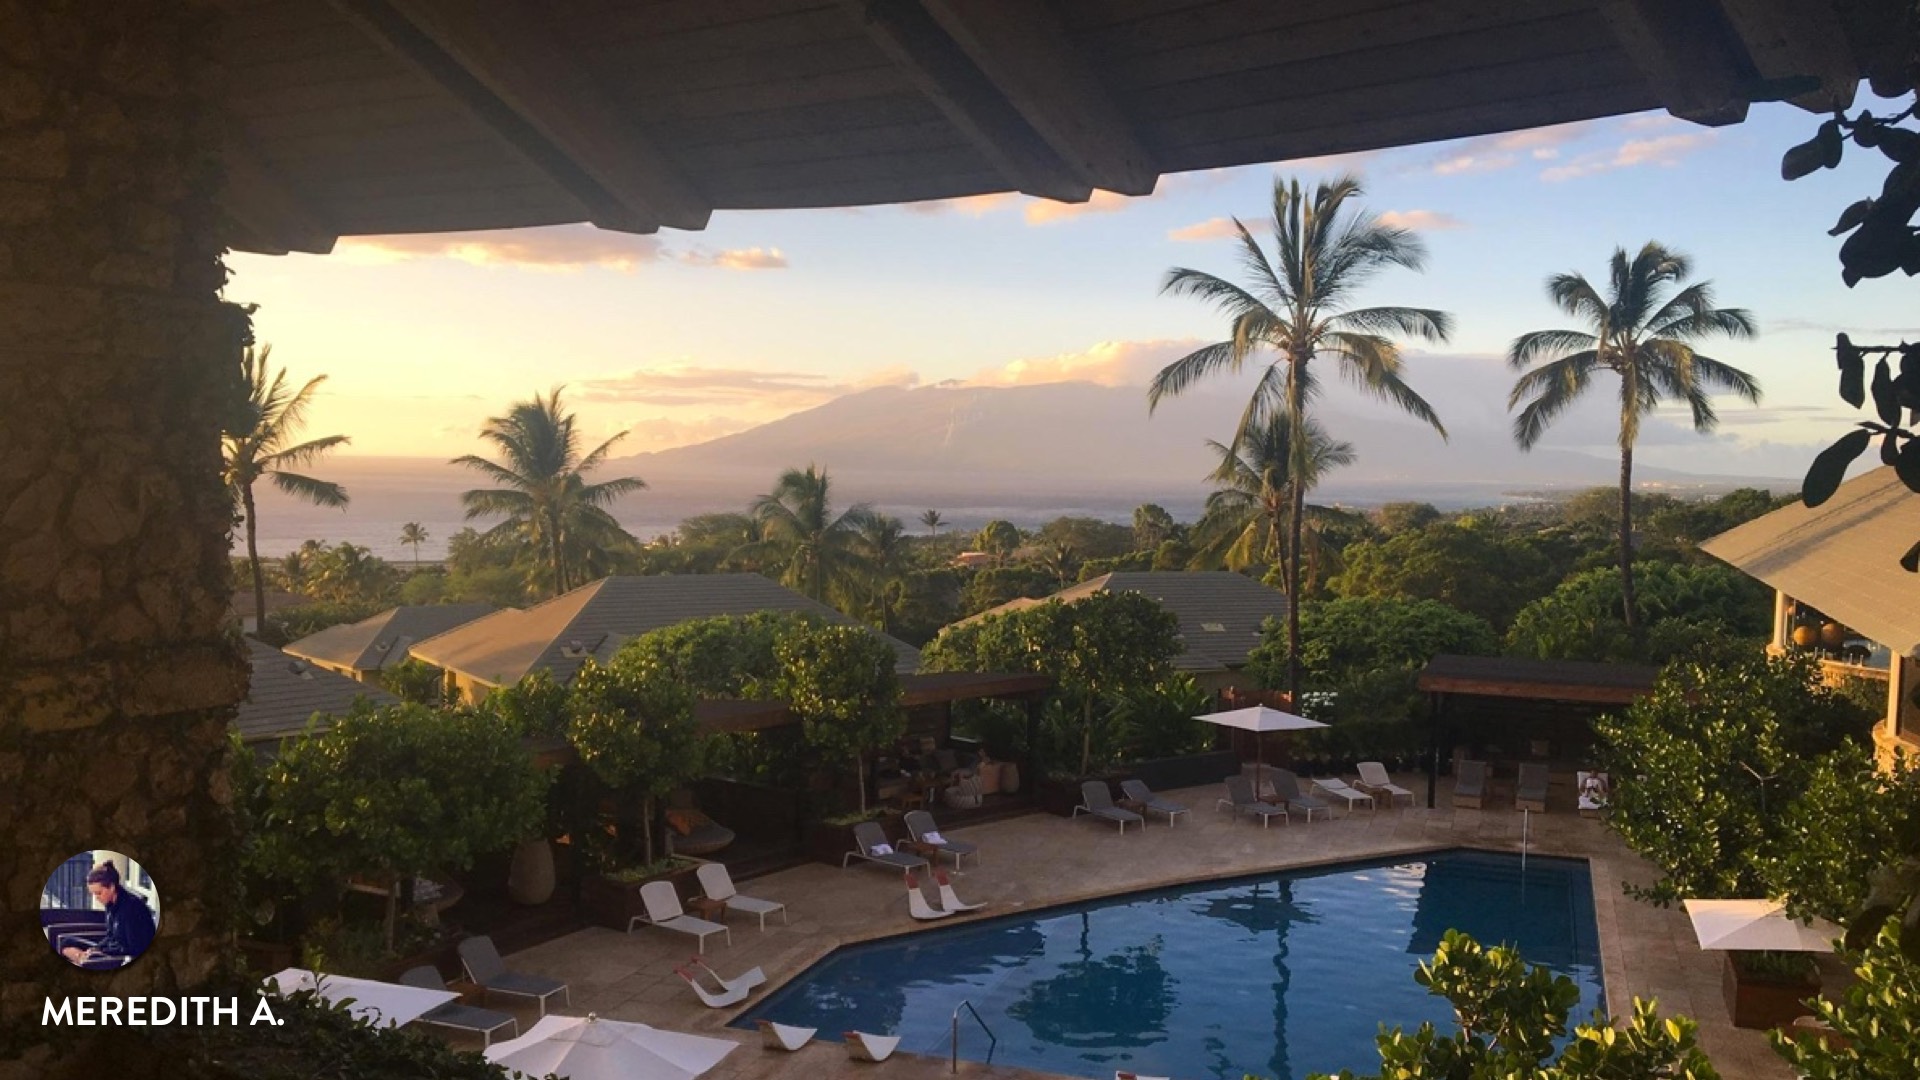 Guest story from Meredith at Hotel Wailea